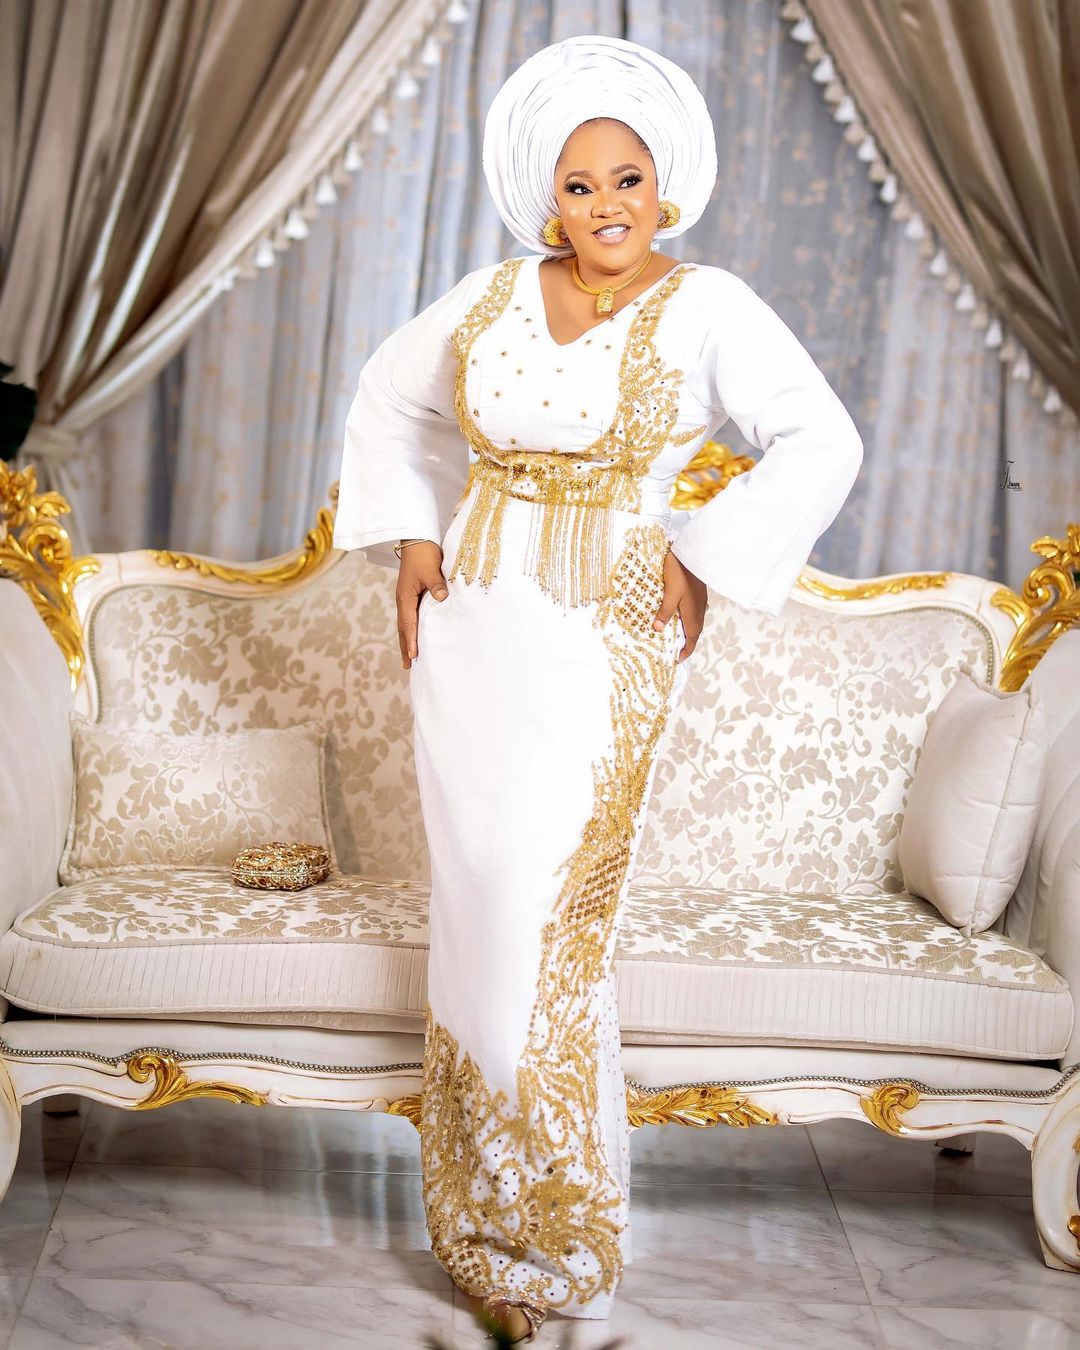 Toyin Abraham- This Is Simply Stunning 